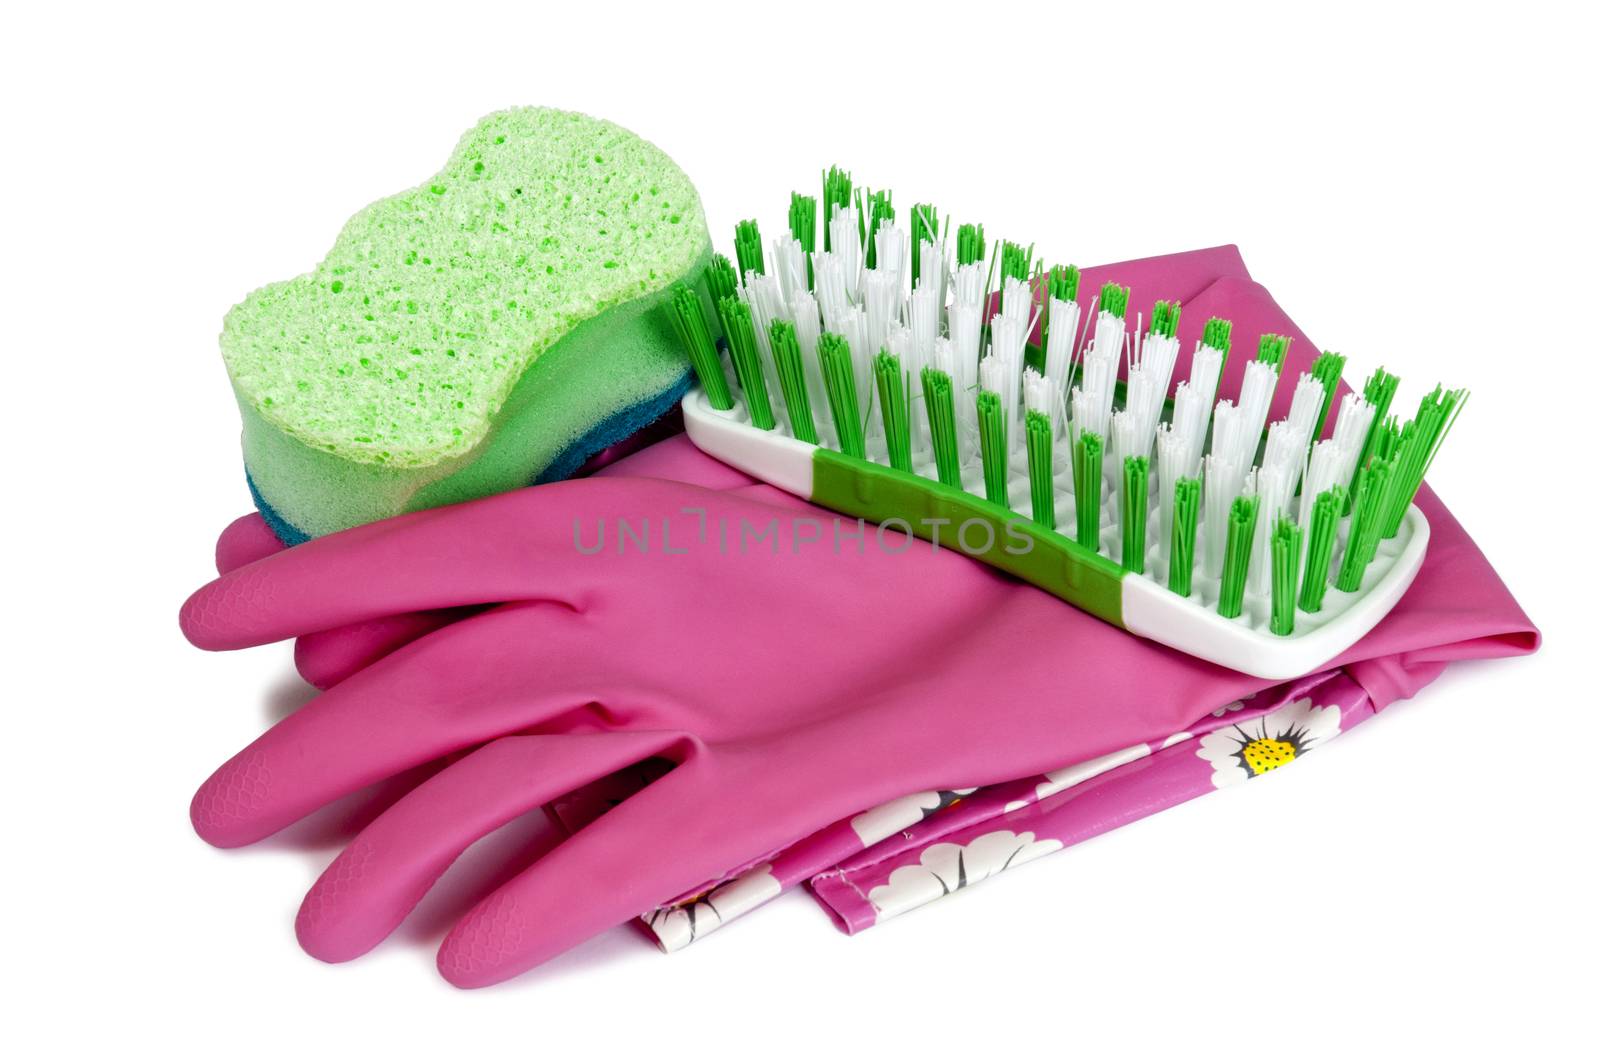 Rubber Gloves With Sponges And Brush by stockbuster1